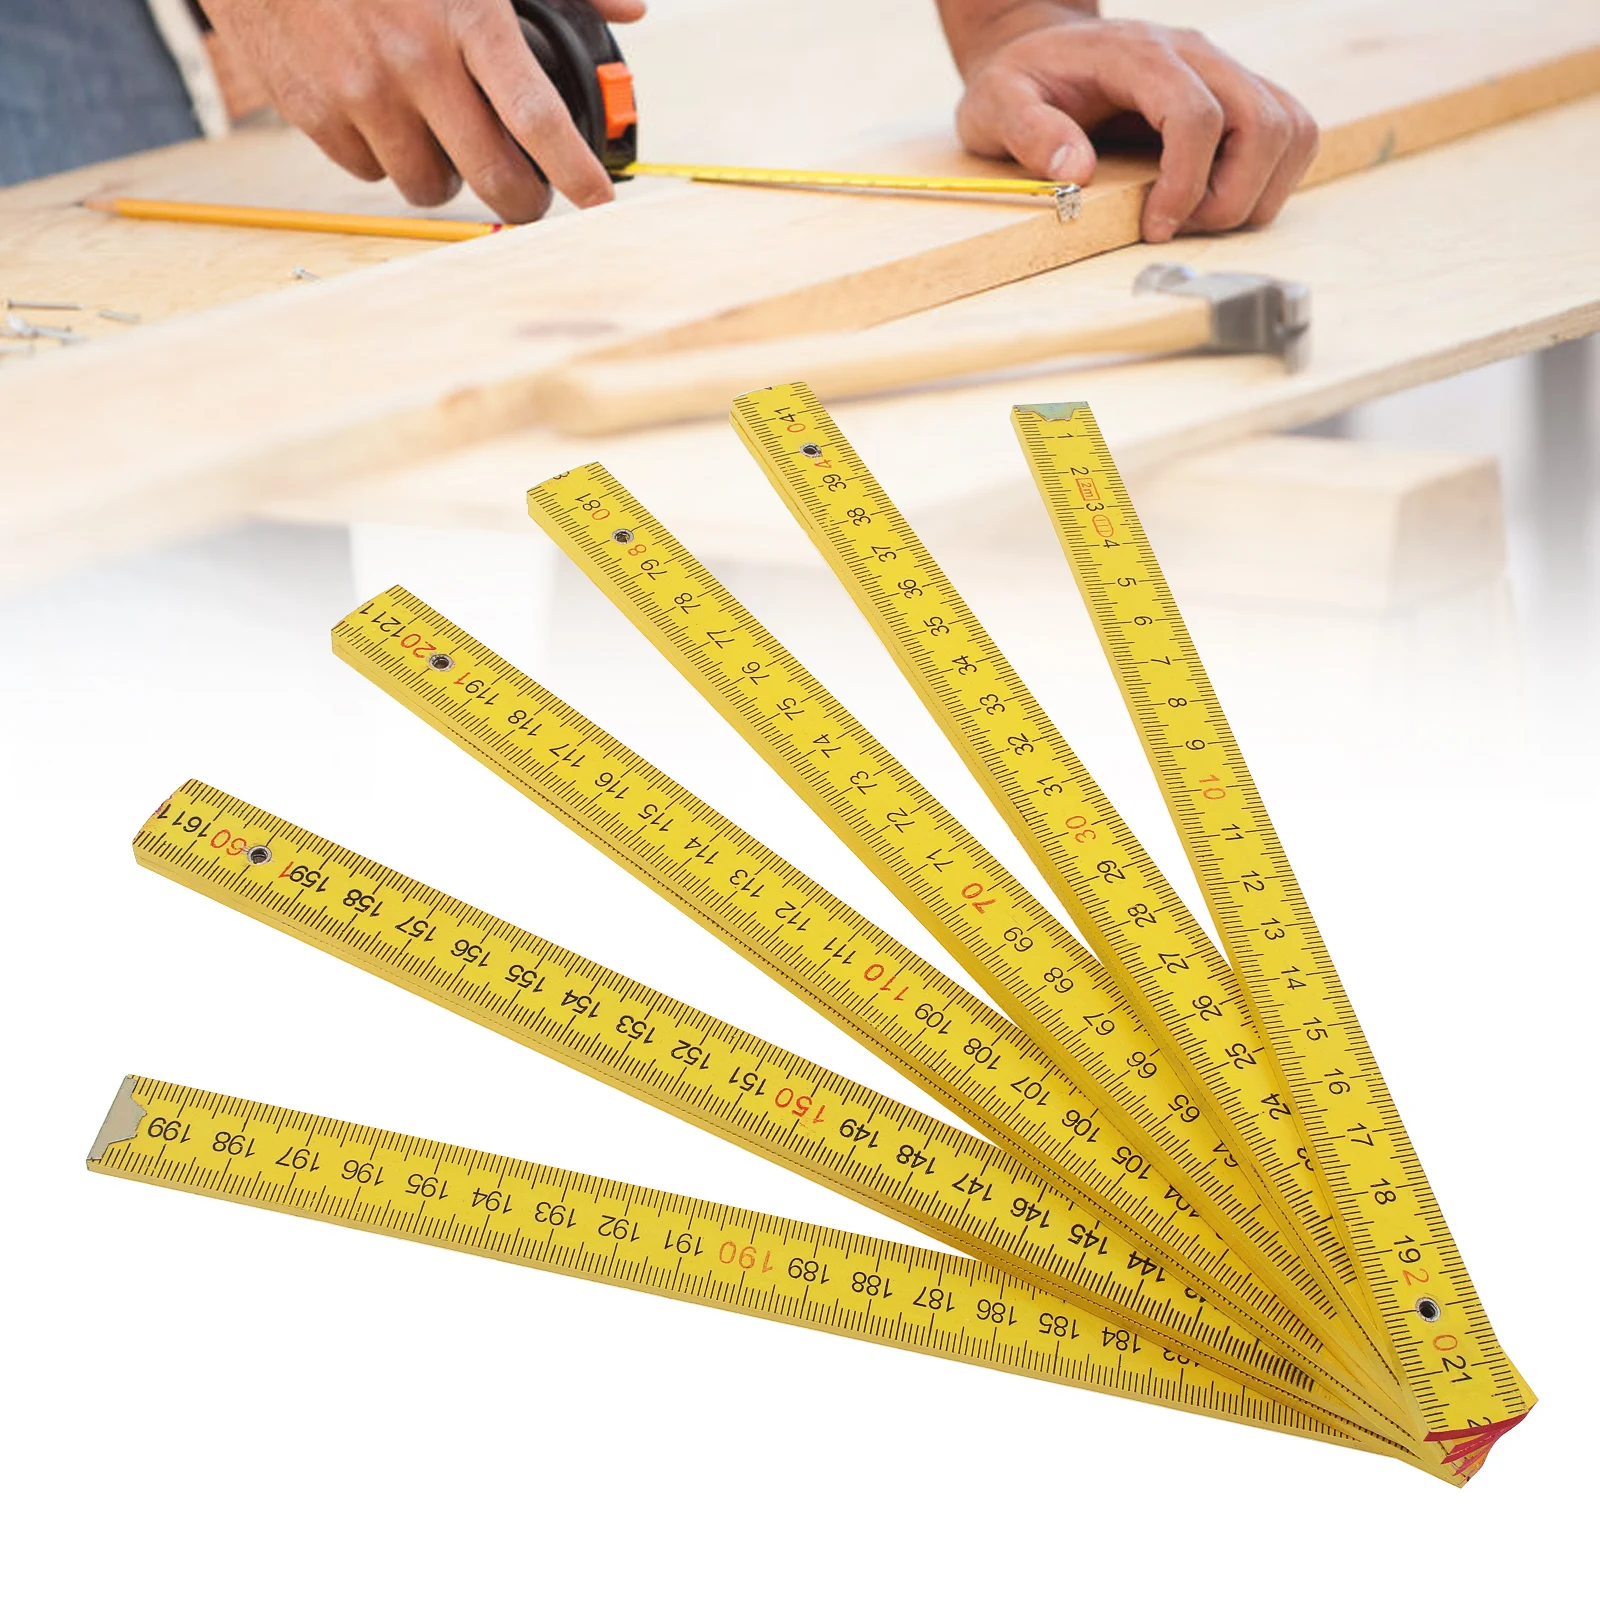 

2m Angle Rulers Folding Wooden Ruler Inch Metric Double Sided Scale for Drawing Teaching Carpenter Measuring Tool